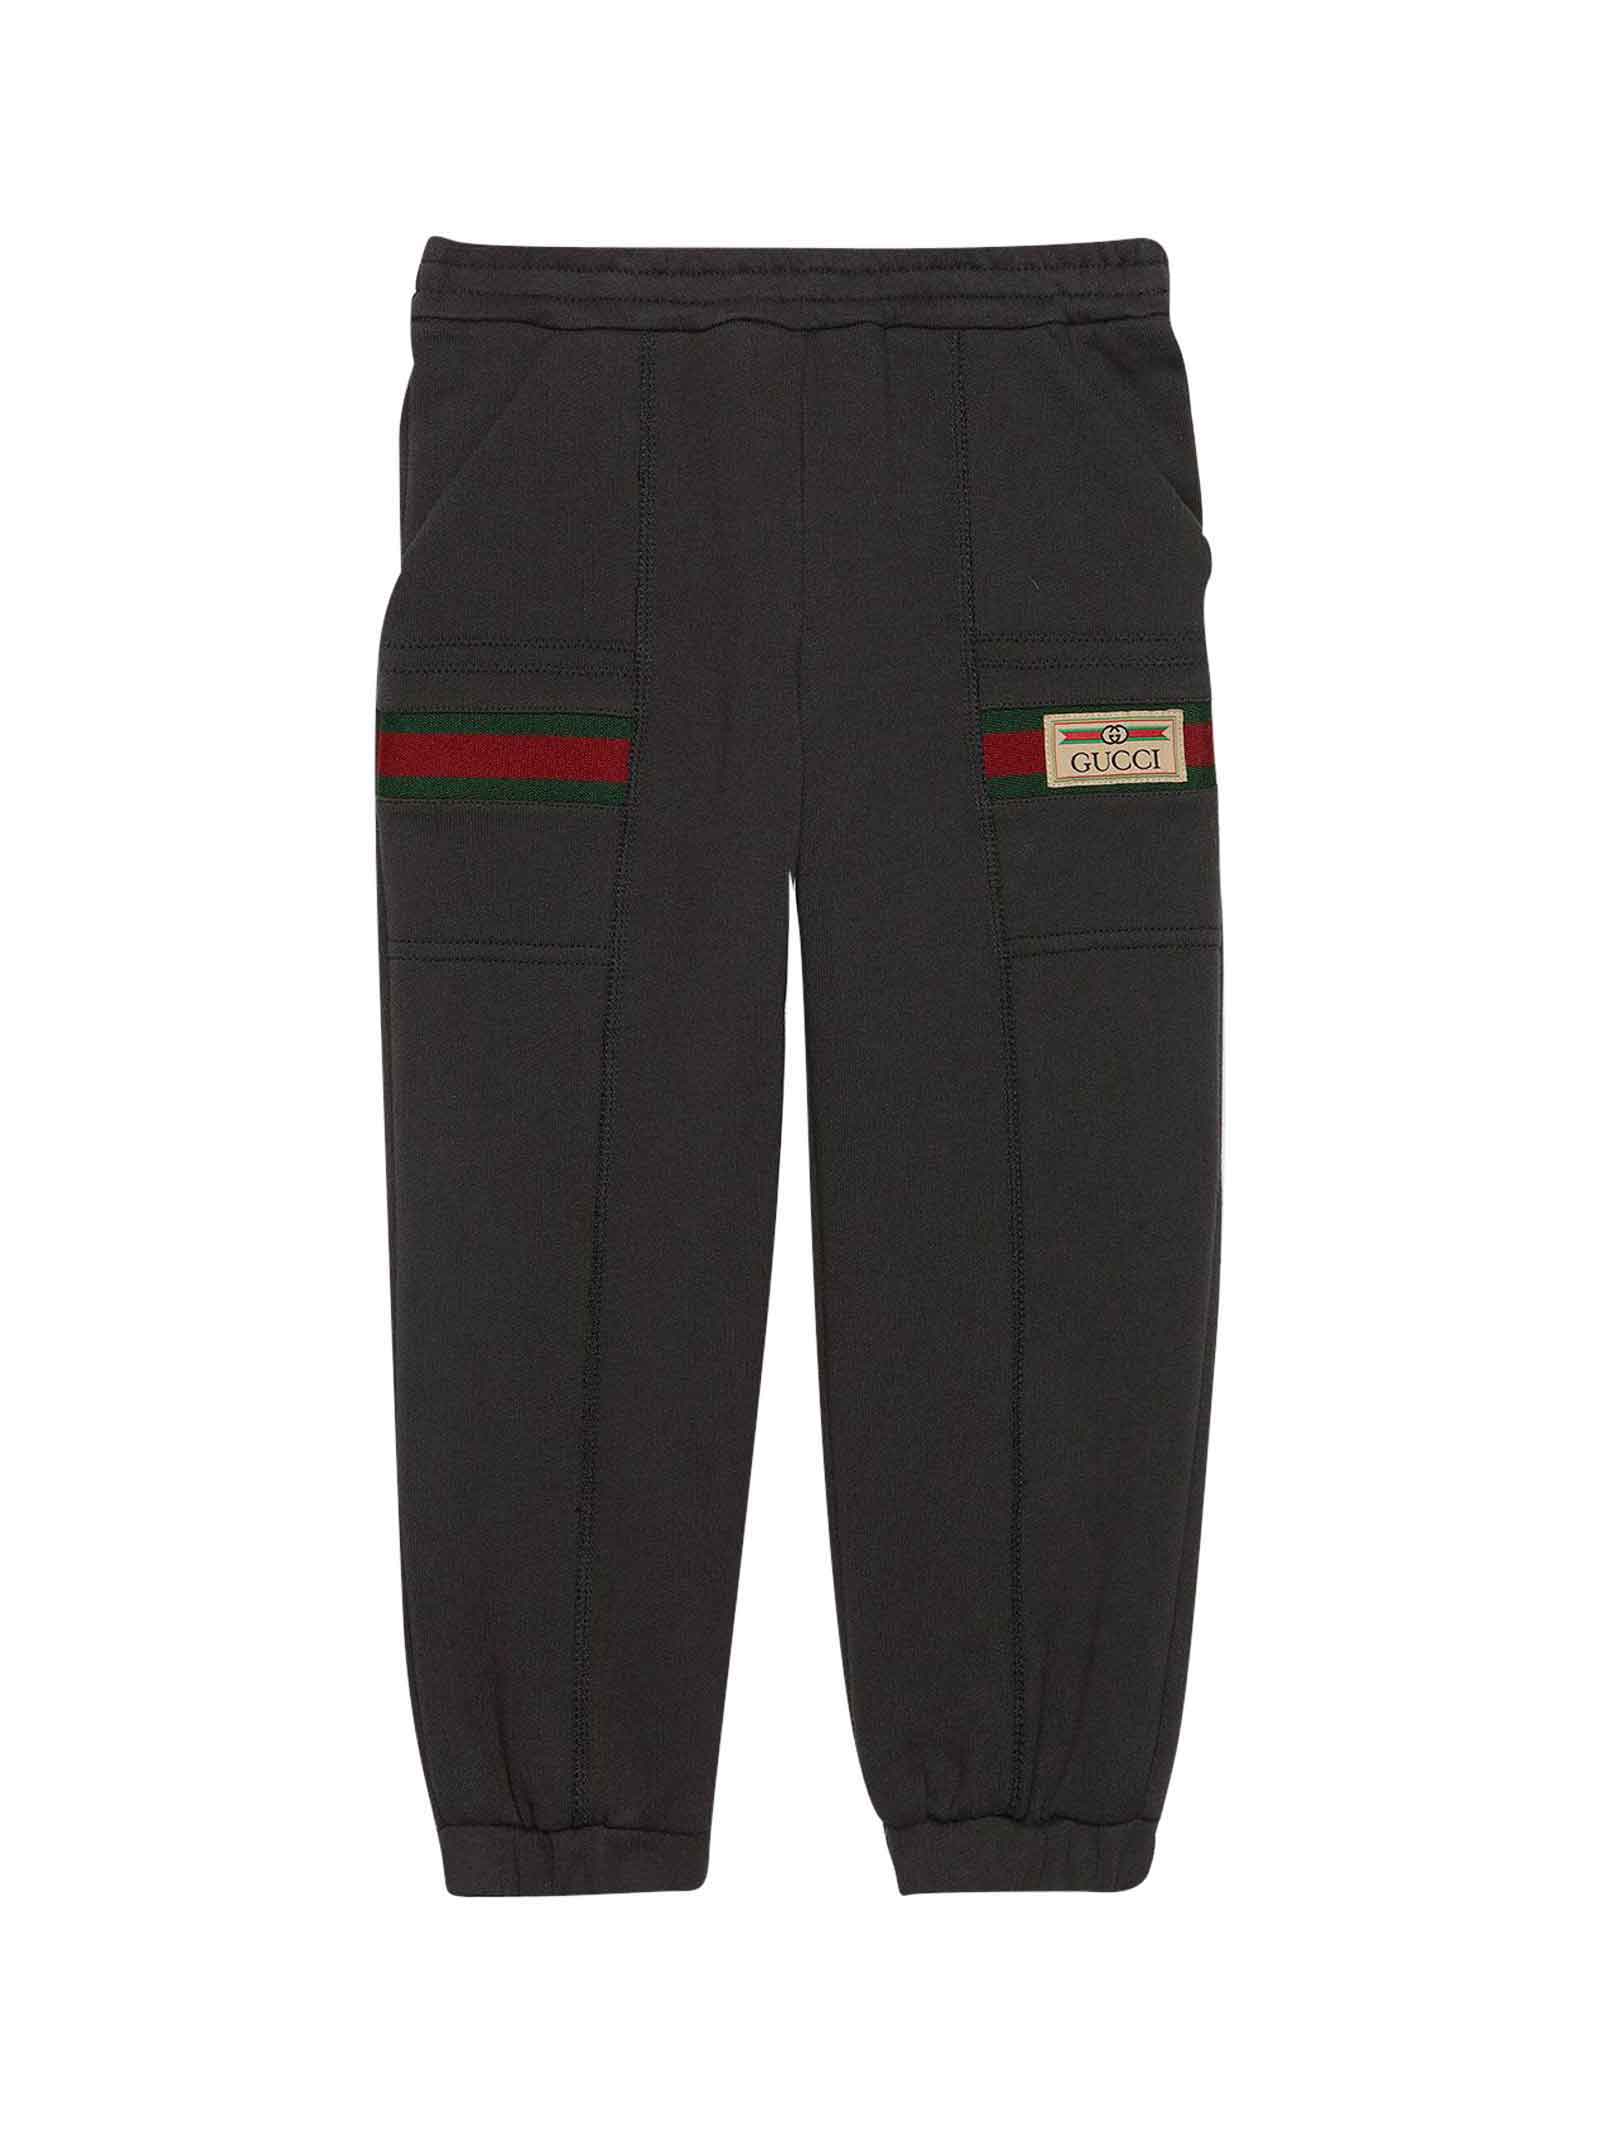 Gucci Black Sporty Trousers With Logo, Elastic Waistband And Cuffs